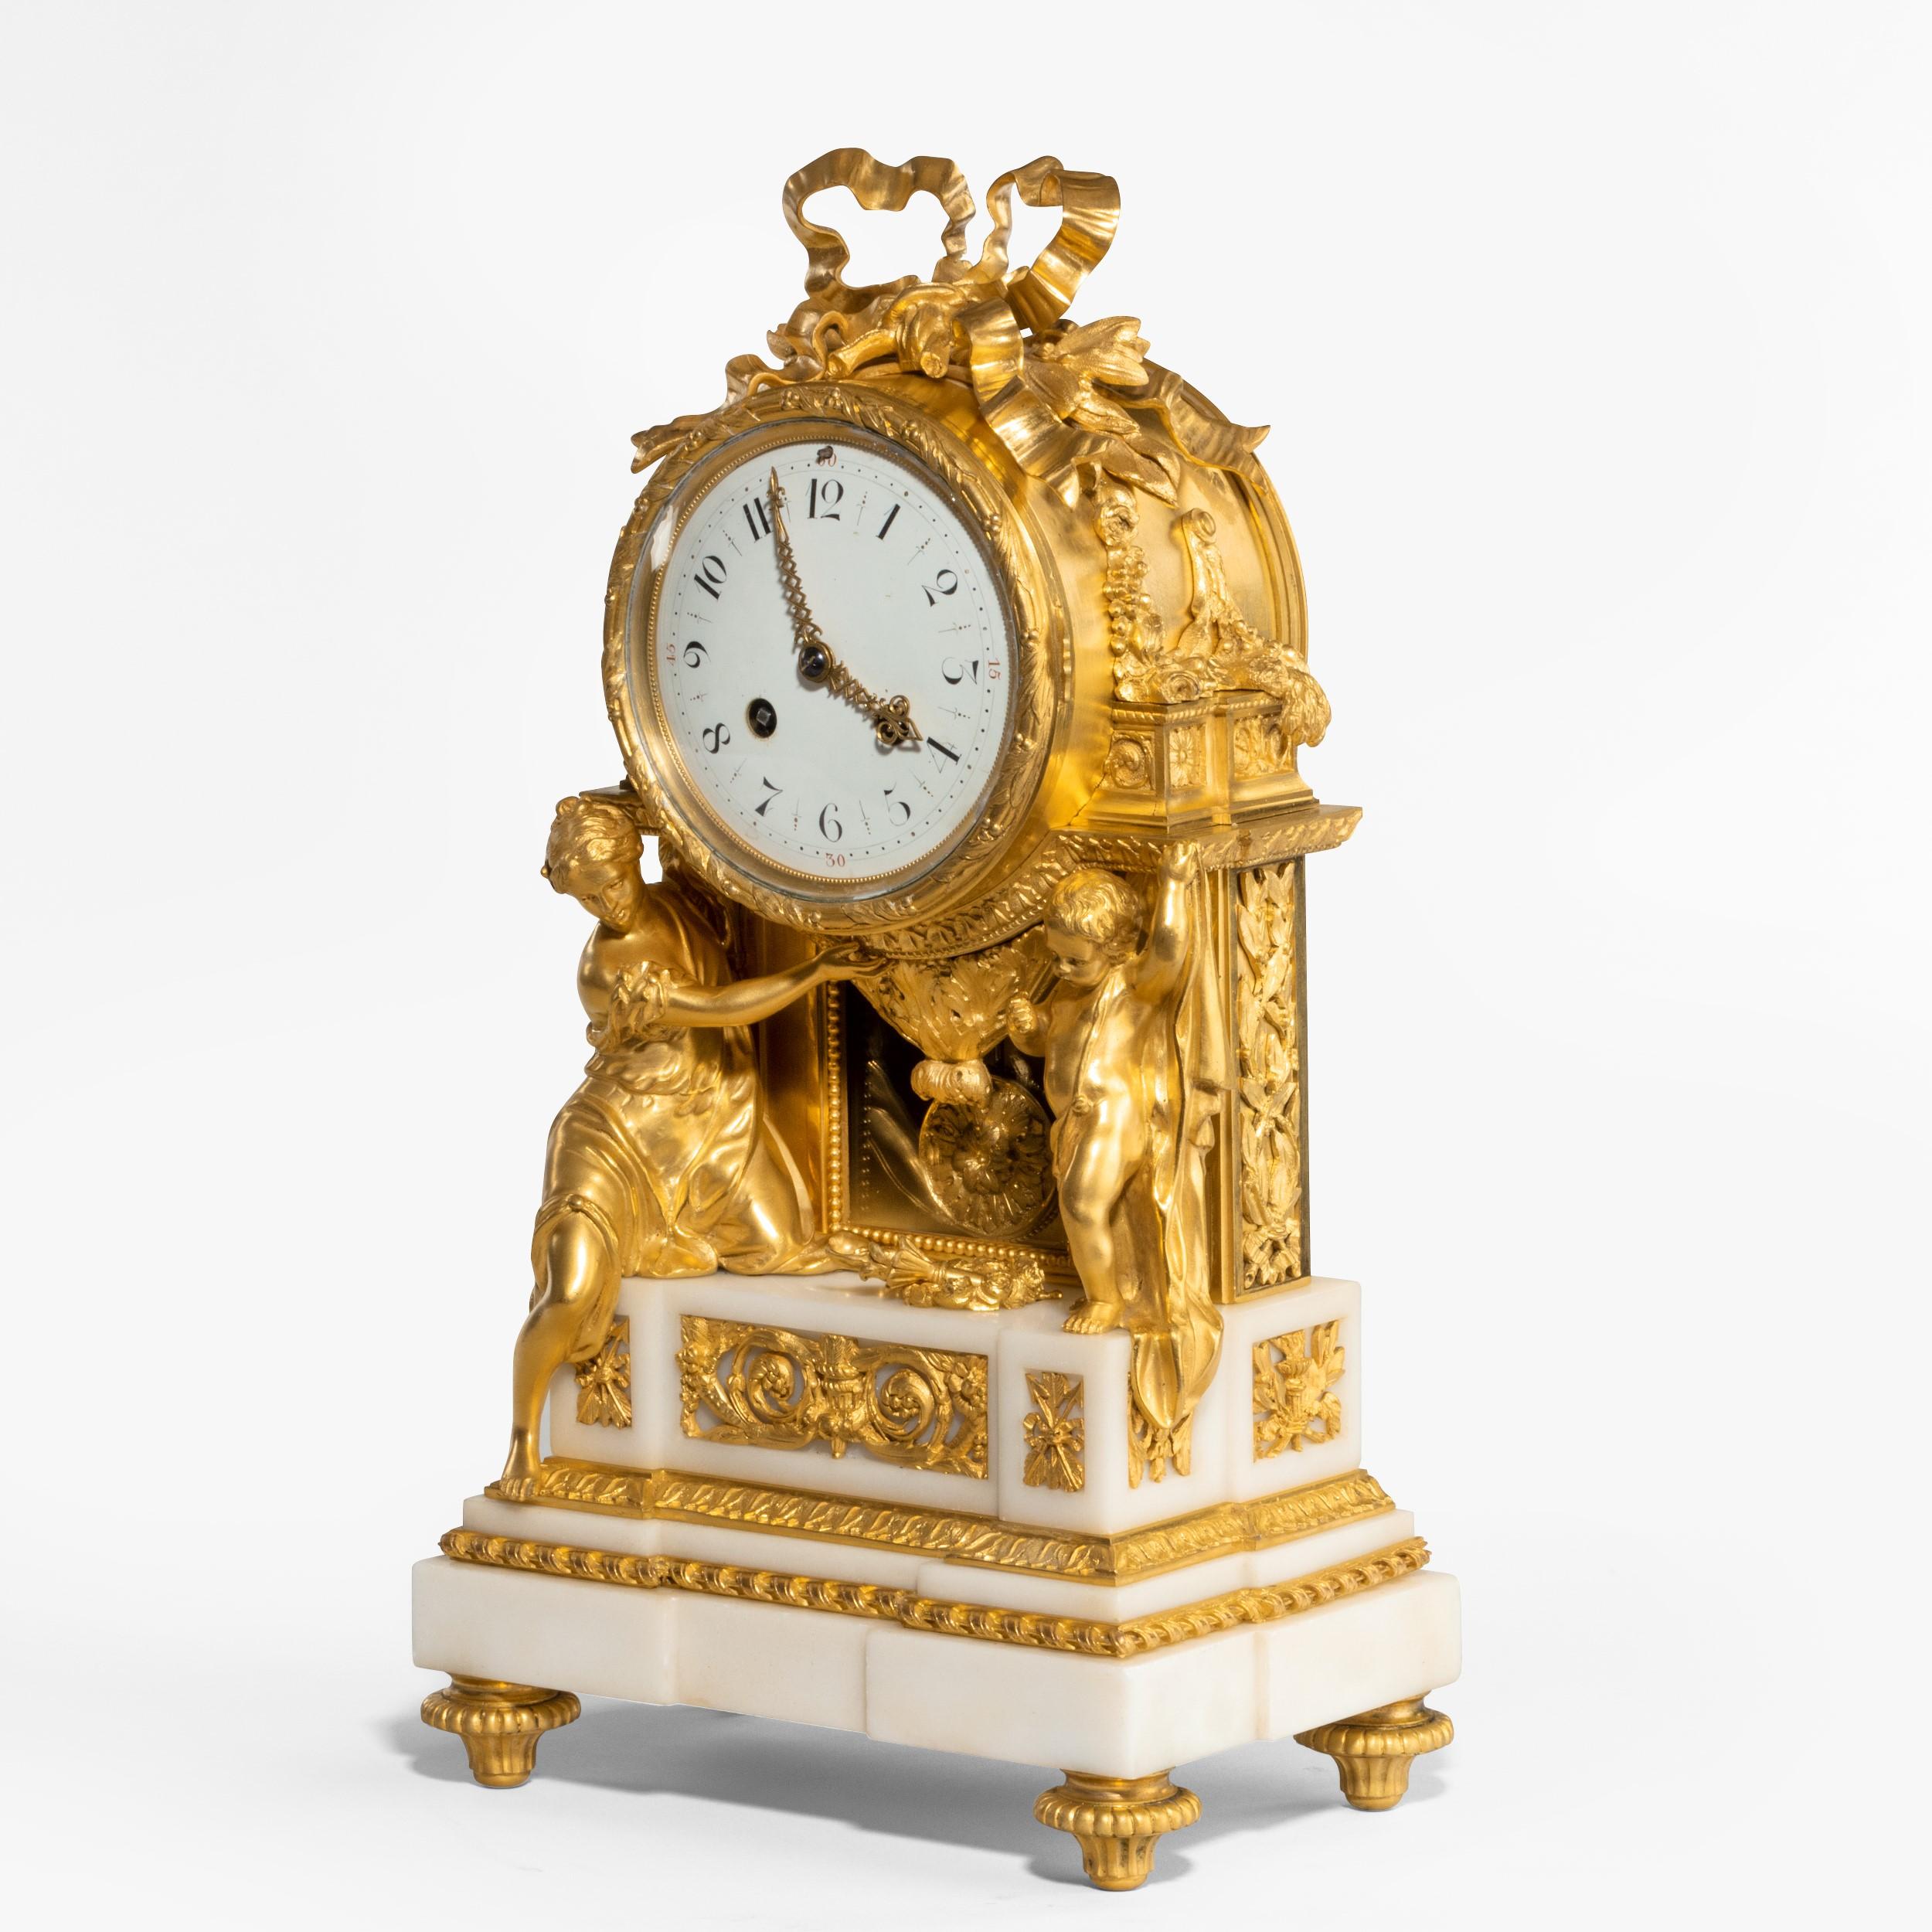 A Belle Époque mantle clock by Samuel Marti

Constructed in white Carrara marble and finely cast ormolu; four toupie feet support the inverted breakfront stepped marble plinth, dressed with stiff leaf running mounts, and surmounted with figures of